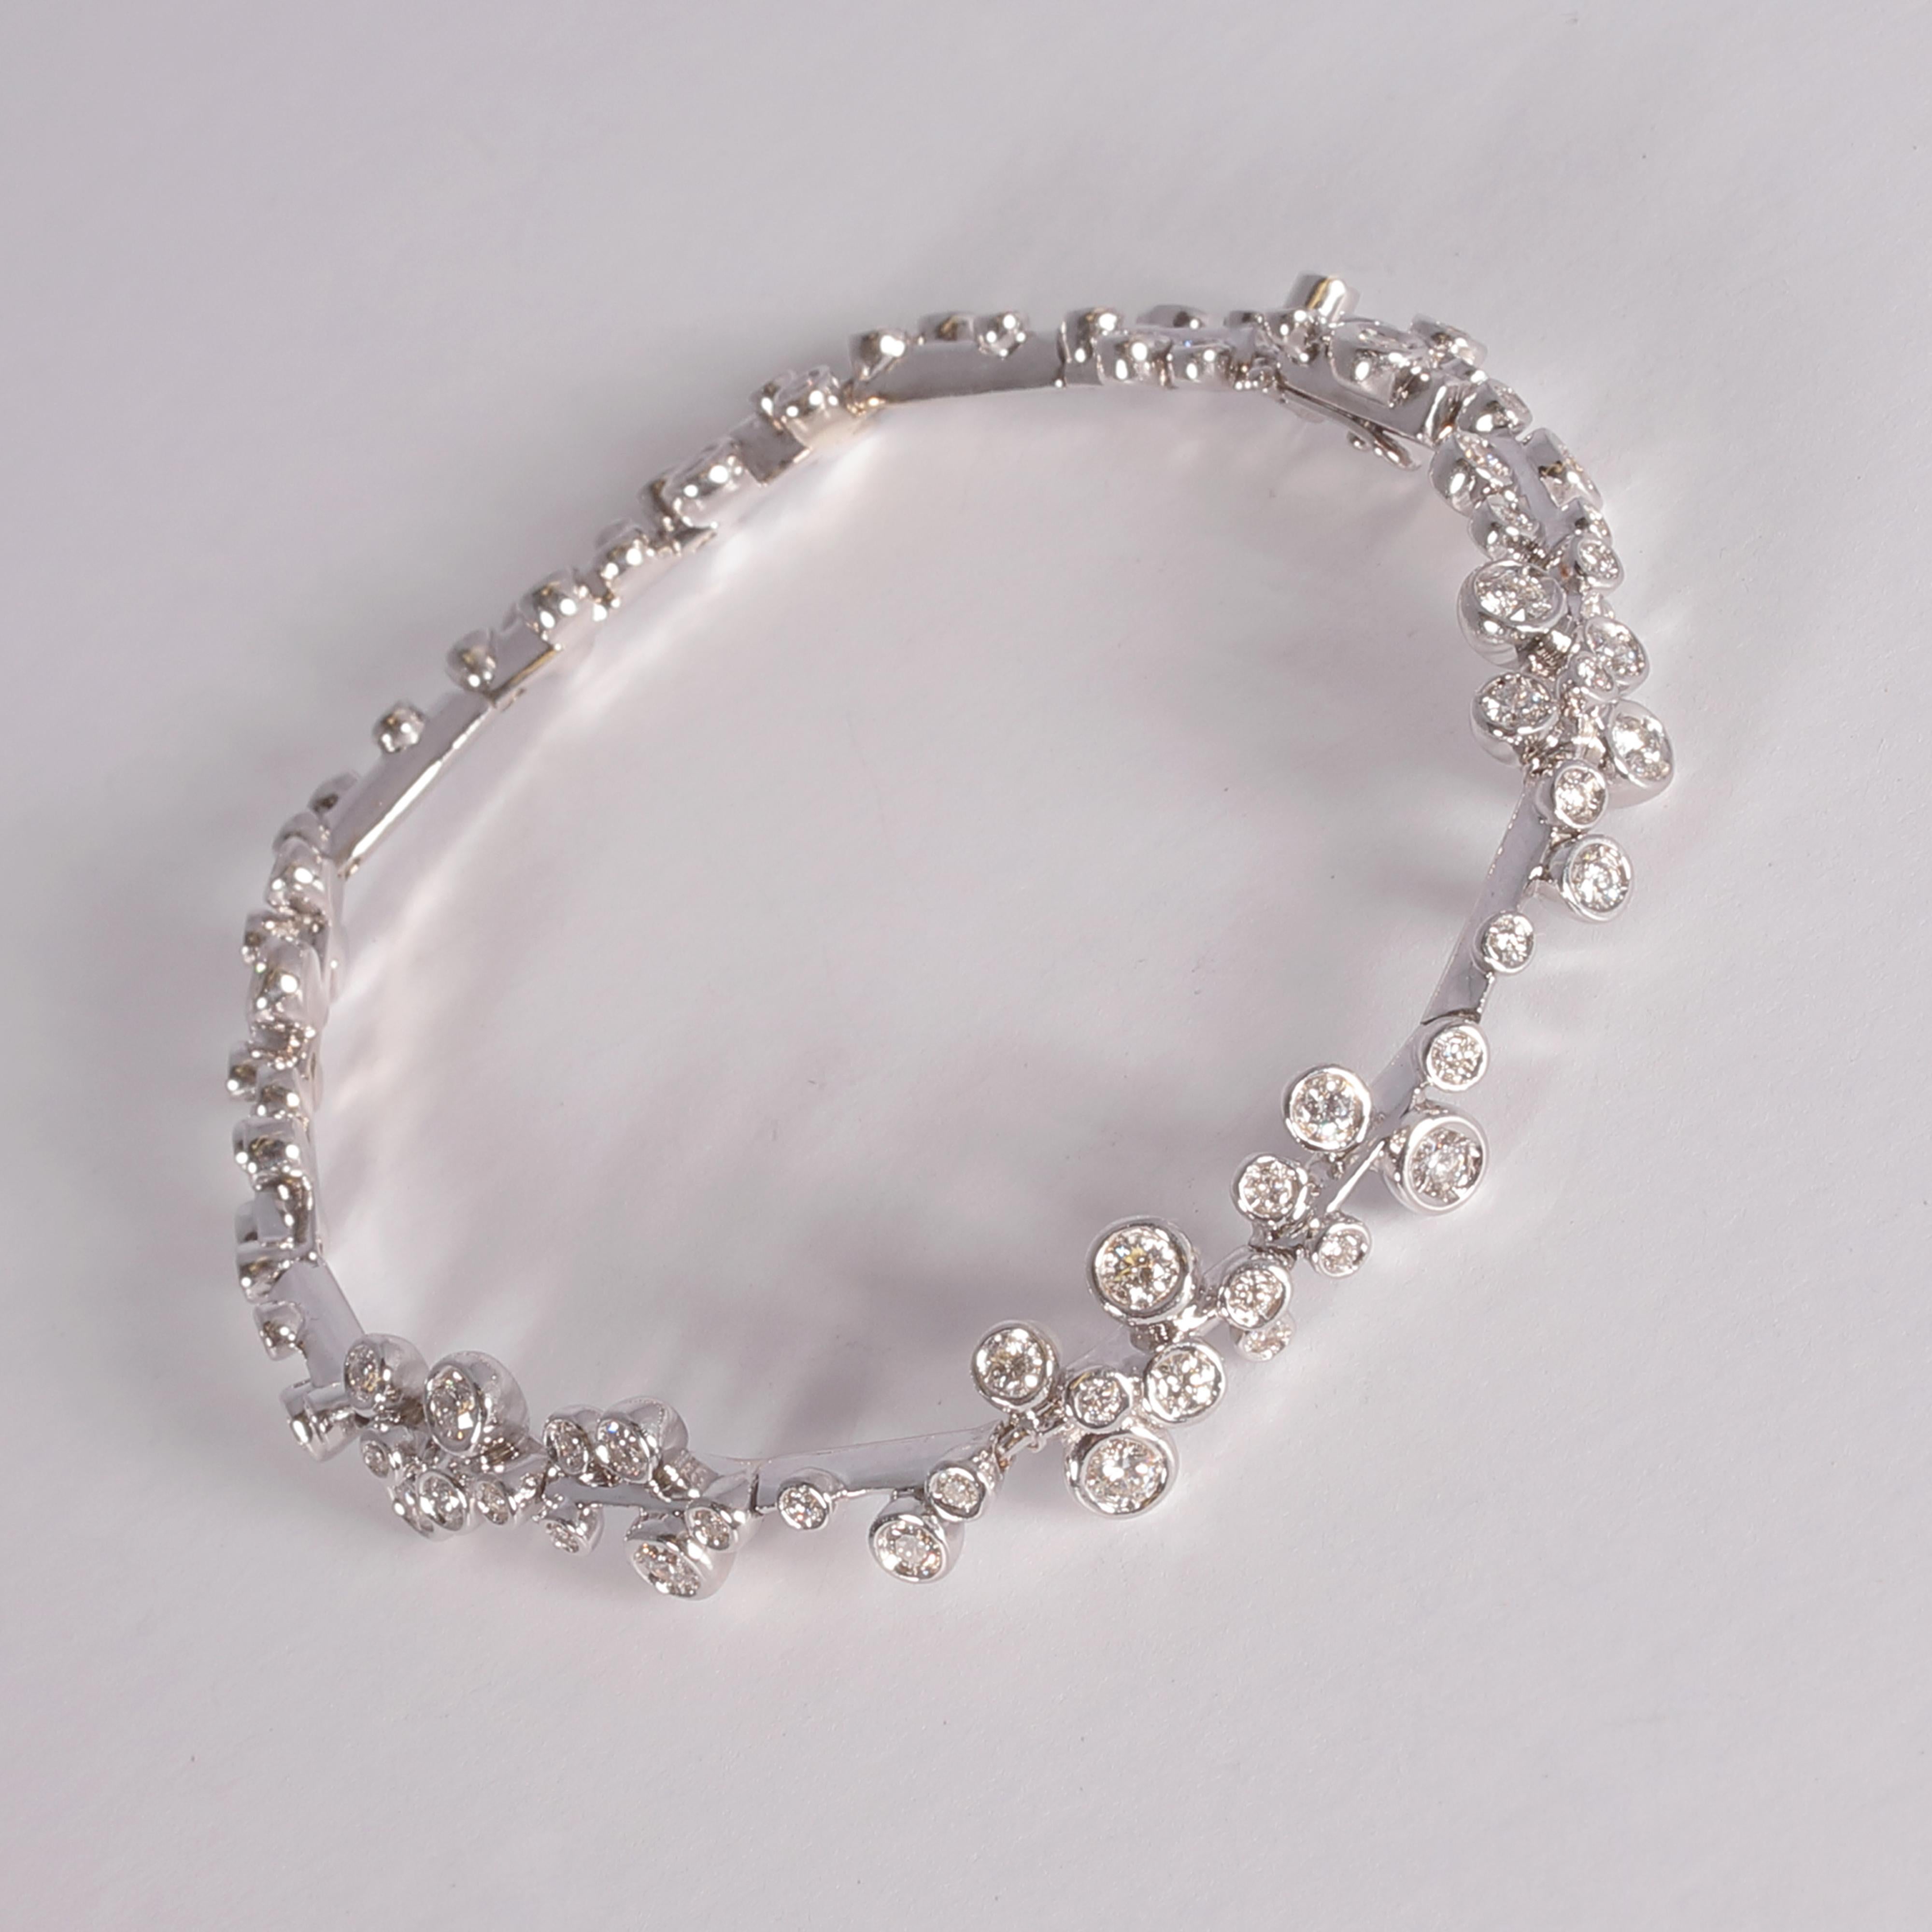 Purchased from famed London designer David Morris, this 18 karat white gold bracelet features 1.95 carats of asymmetrically placed, bezel-set, round diamonds on an articulated white gold bar.  